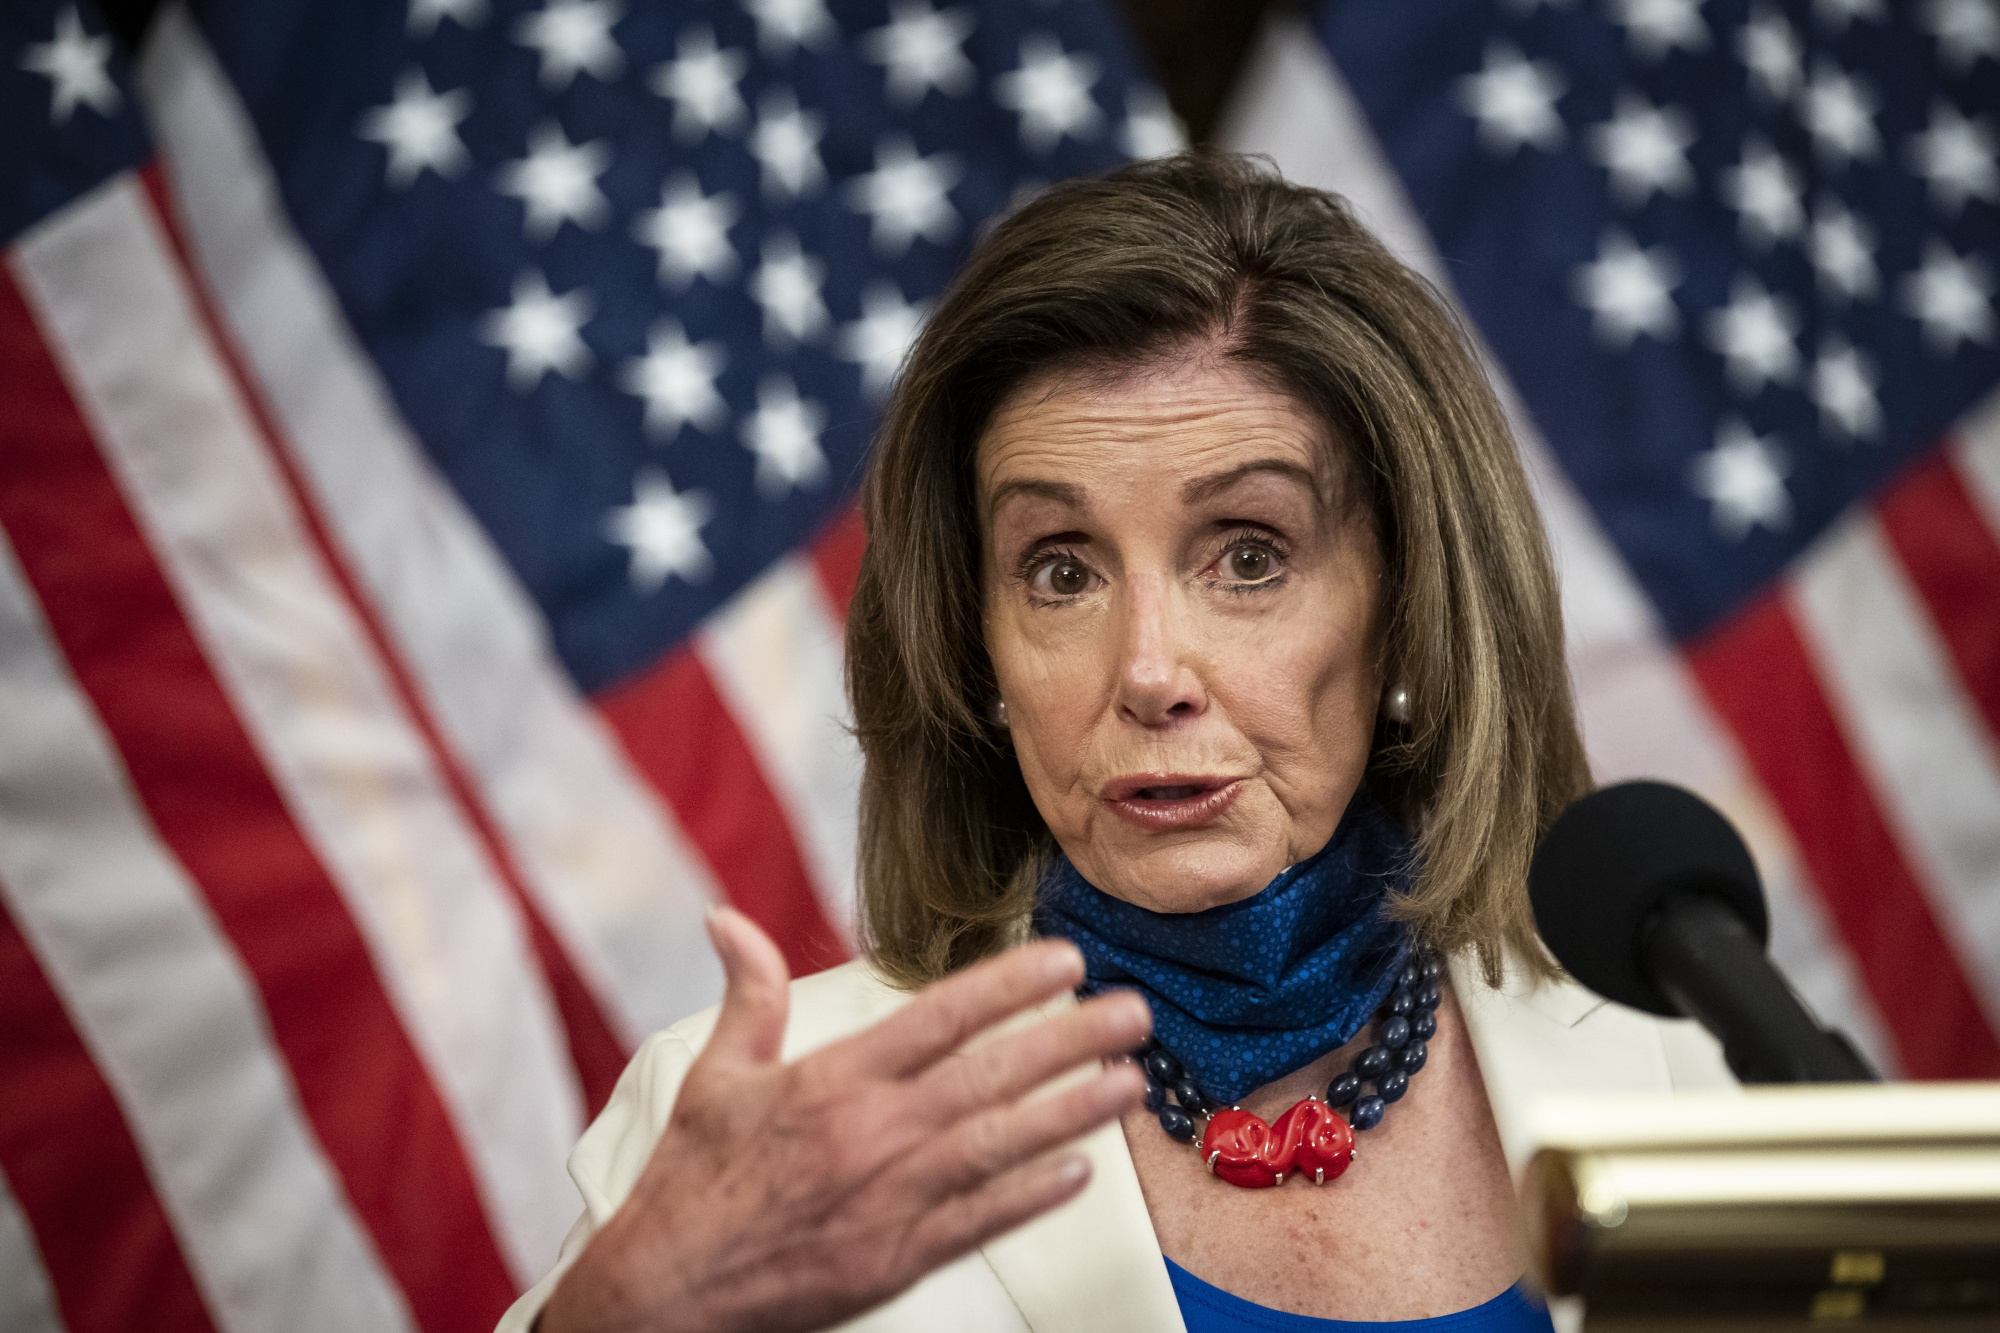 Nancy Pelosi speaks during a news conference on June 24, 2020.